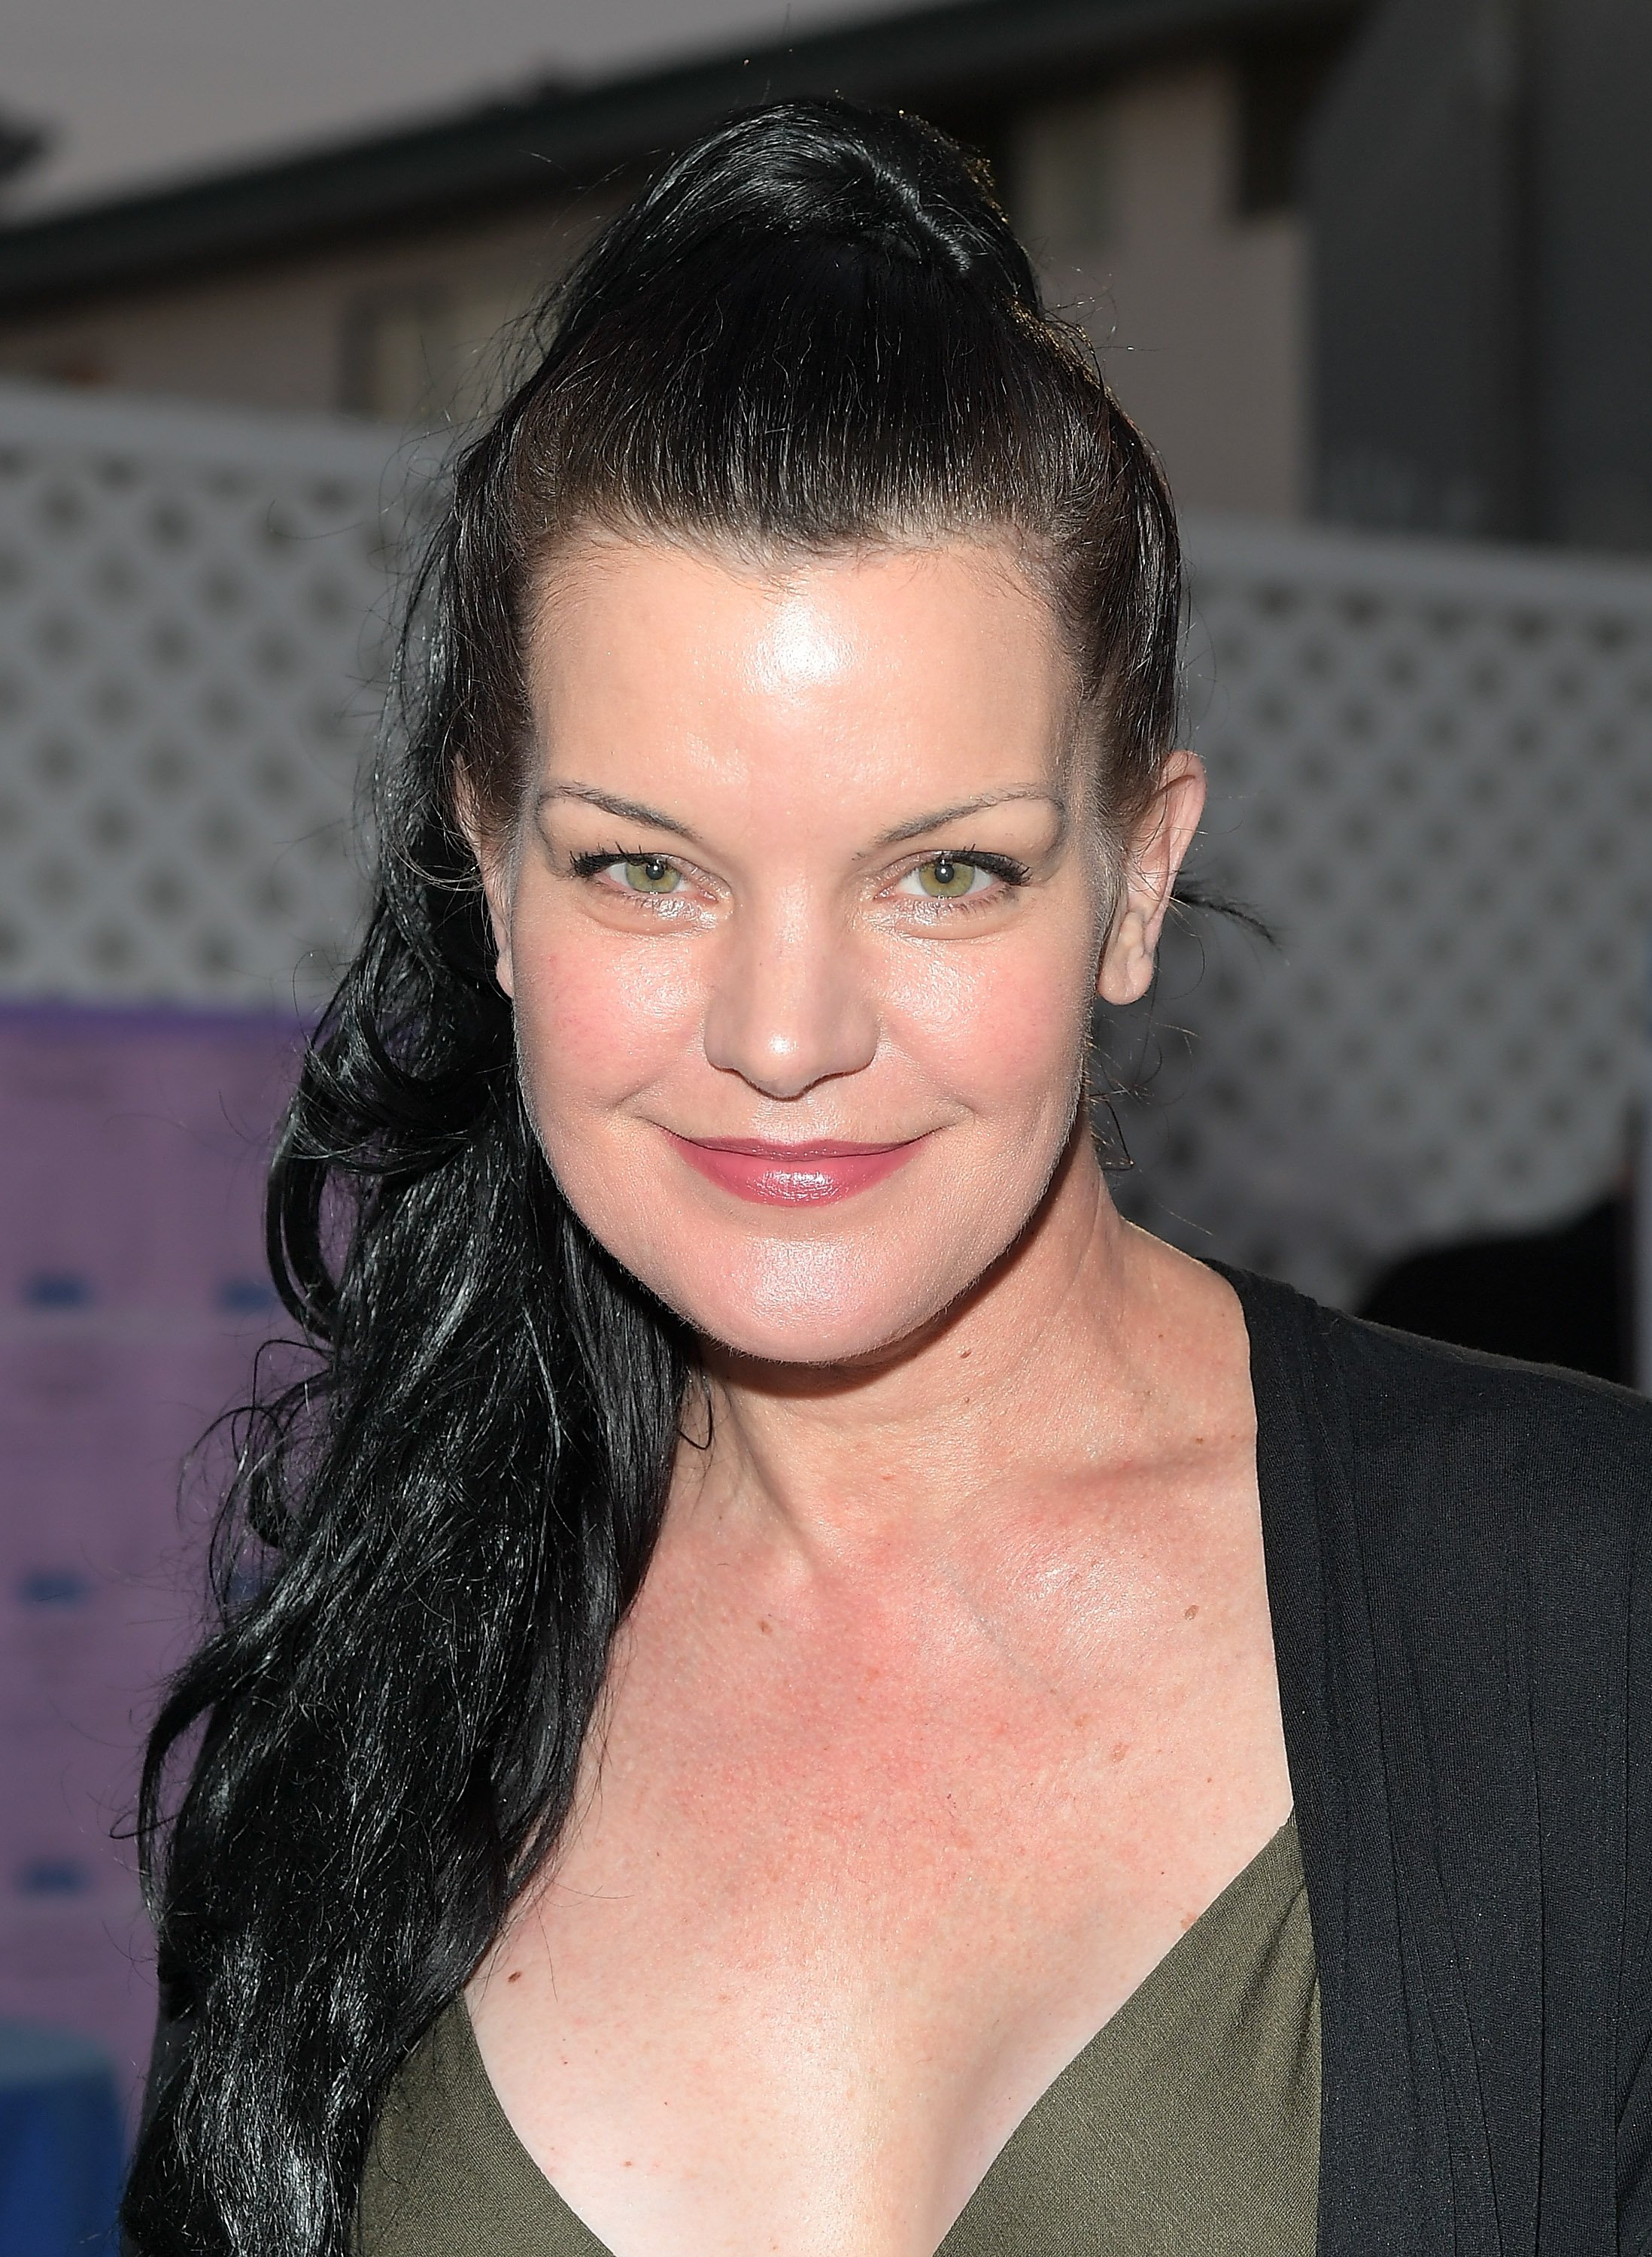 Pauley Perrette attends Project Angel Food's 2018 Angel Awards on August 18, 2018 in Hollywood, California. | Source: Getty Images